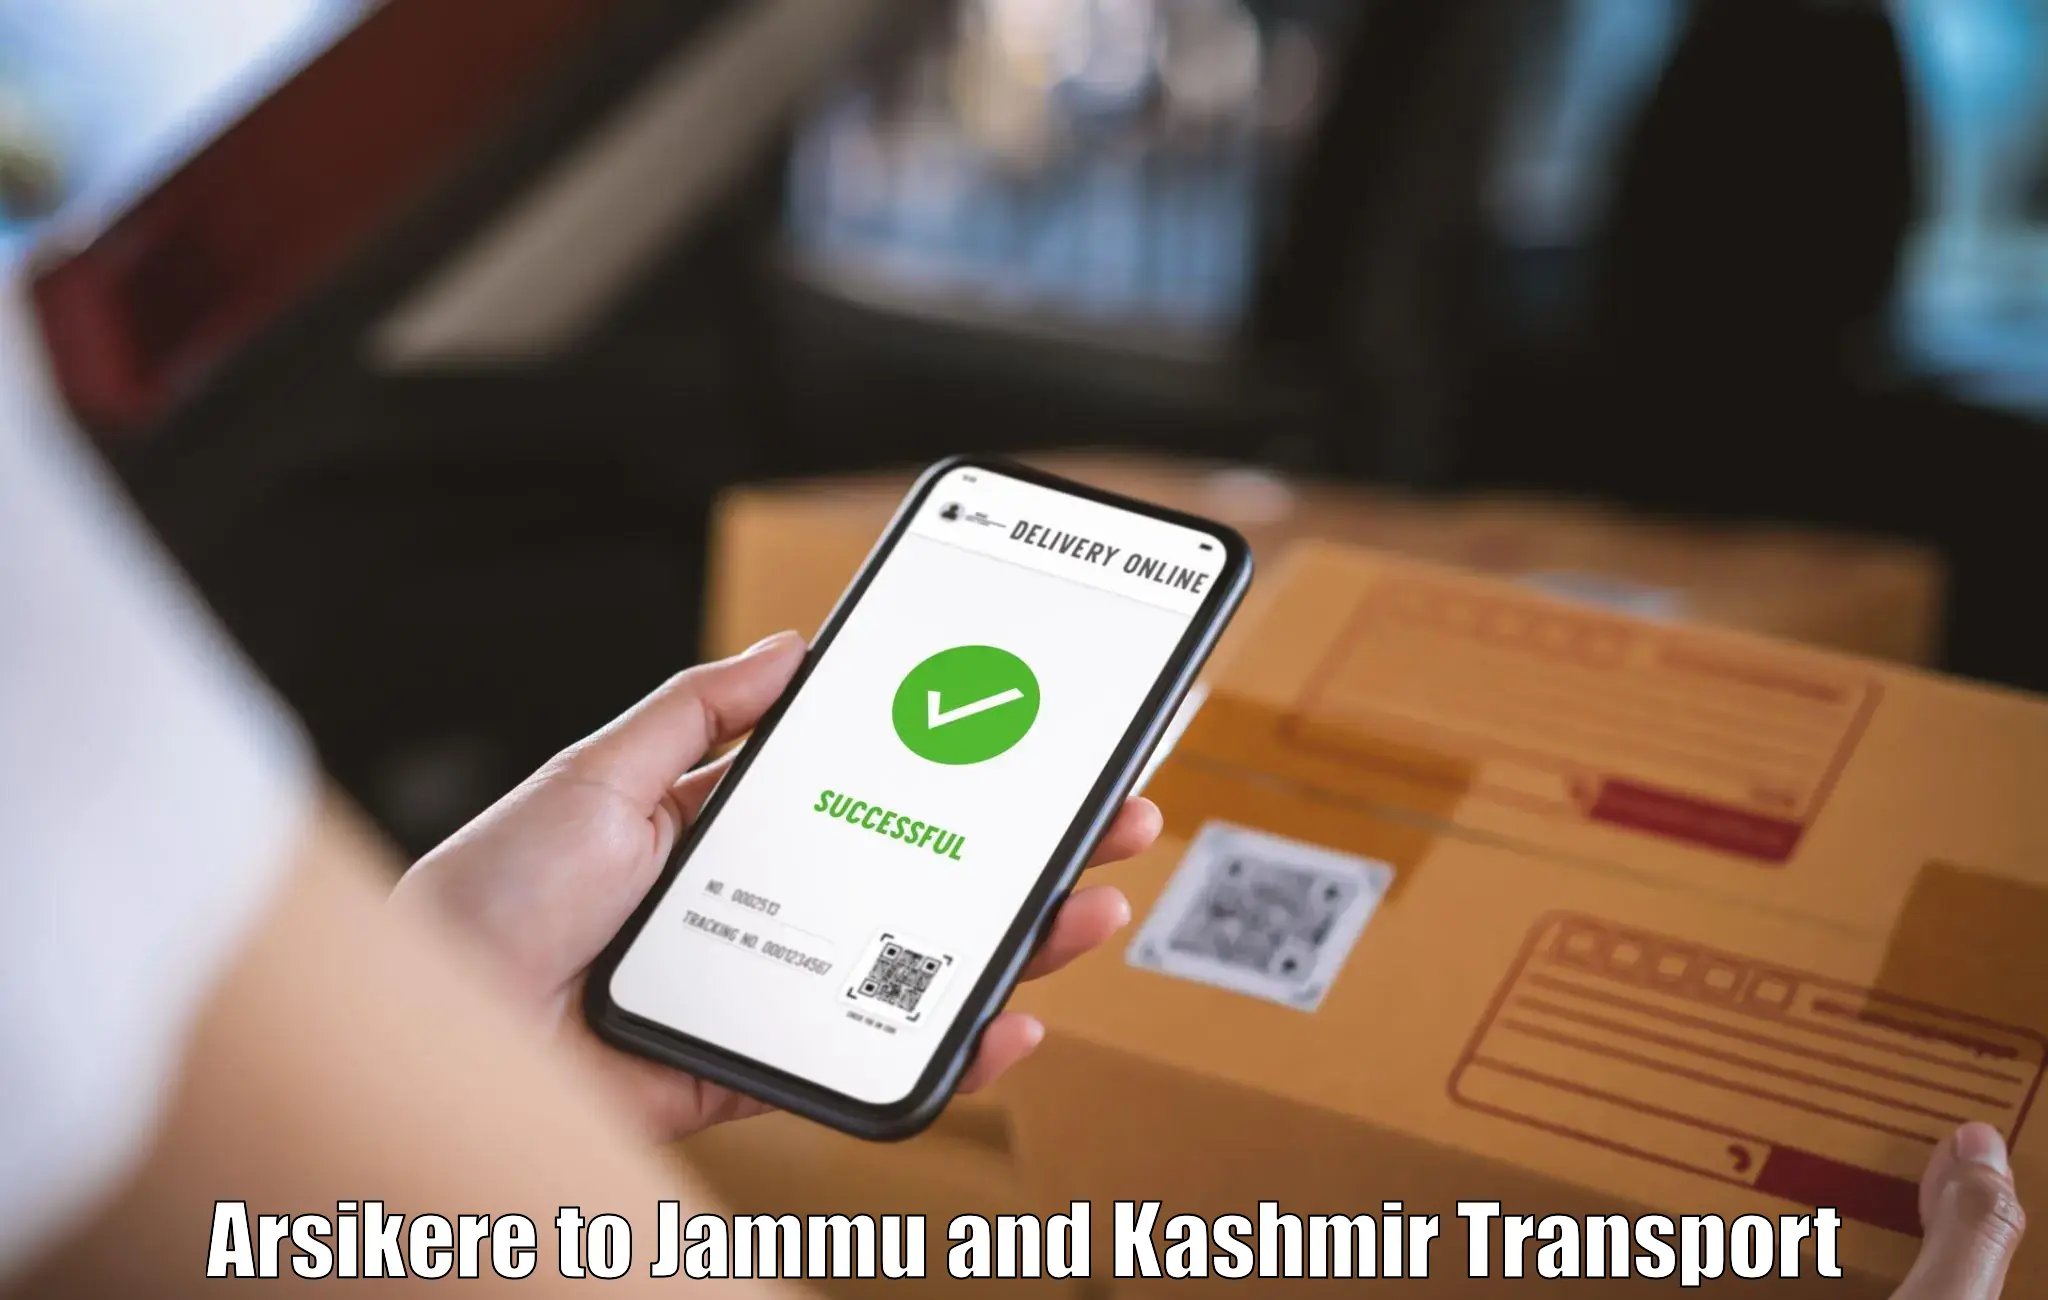 Pick up transport service Arsikere to Pulwama